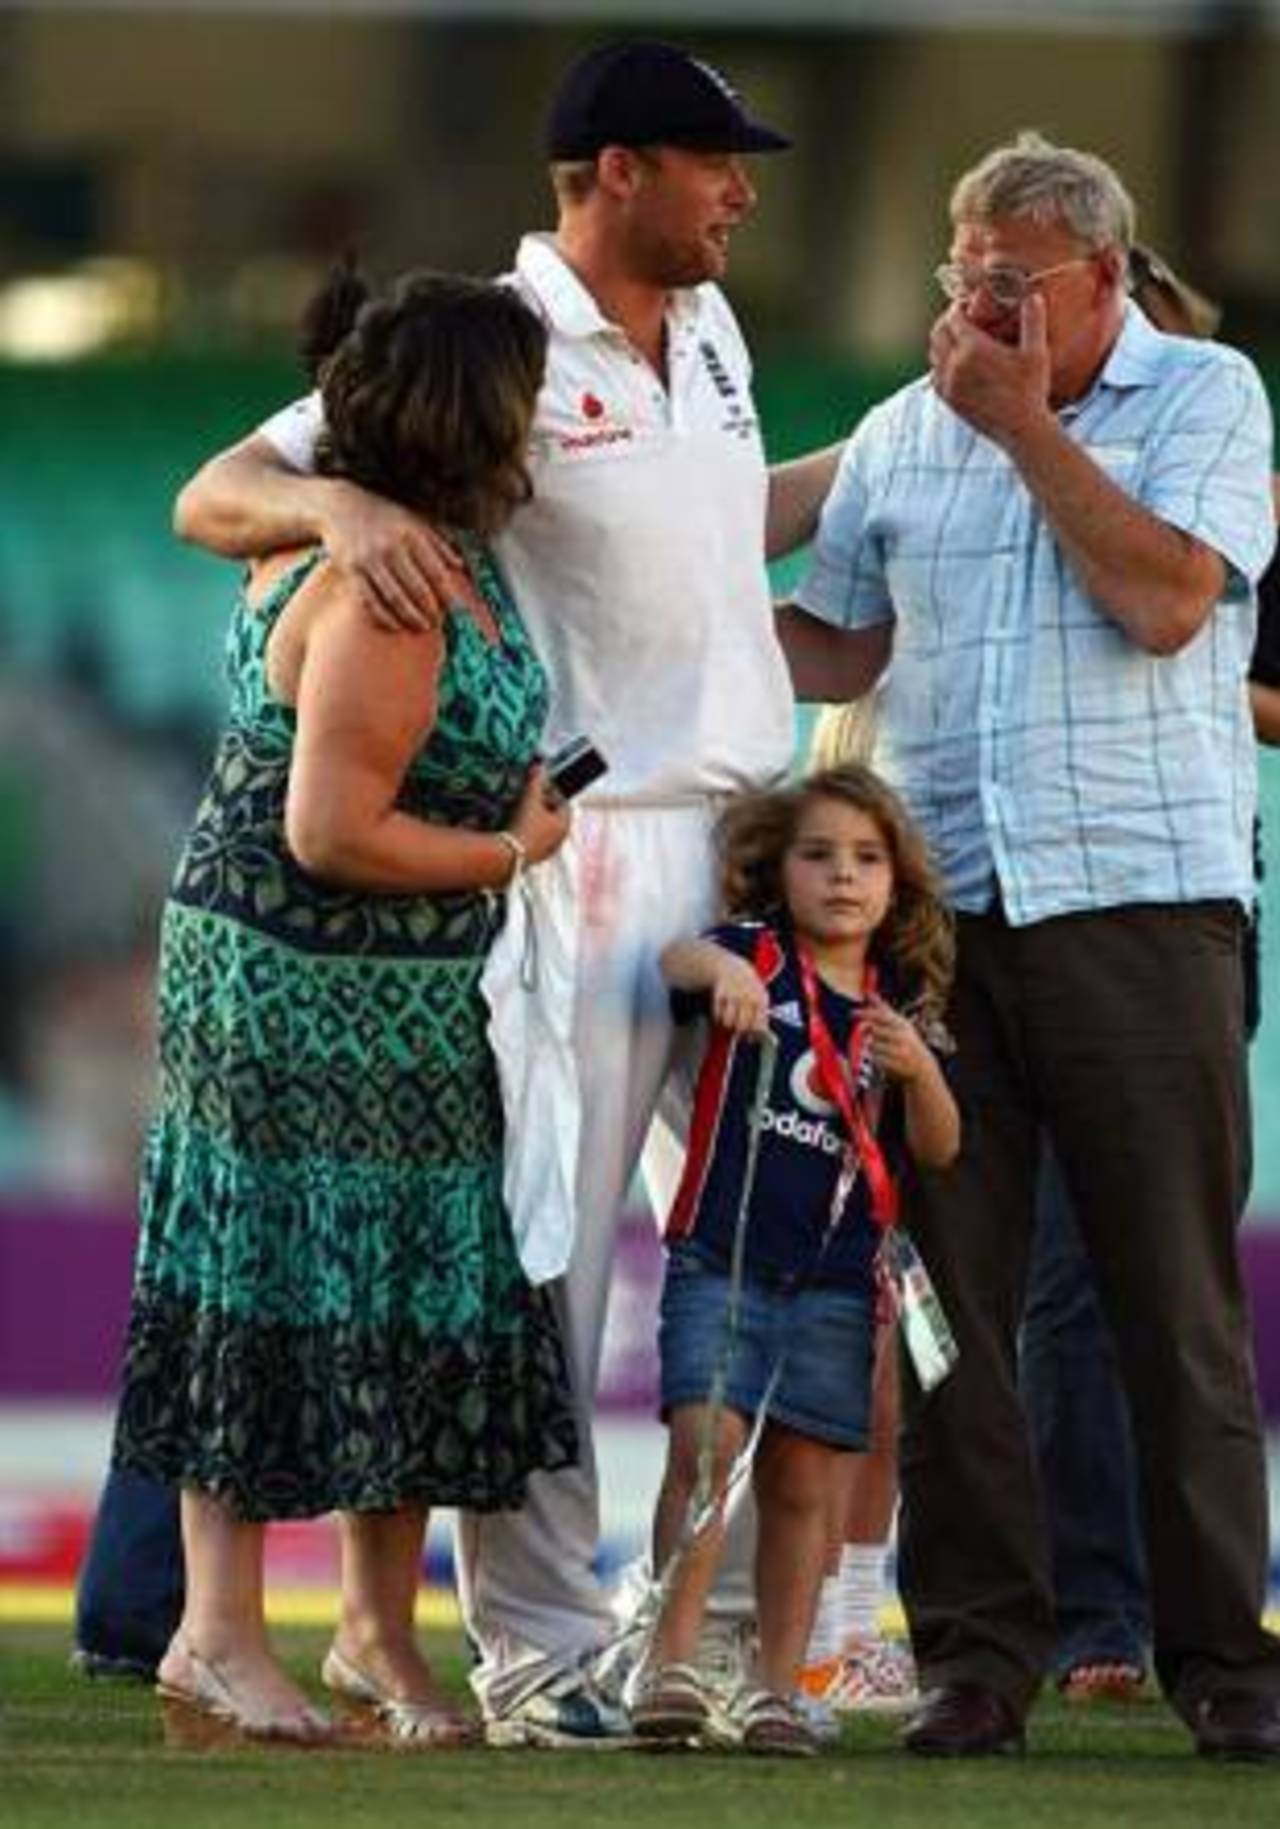 Andrew Flintoff with his emotional parents, England v Australia, 5th Test, The Oval, 4th day, August 23, 2009